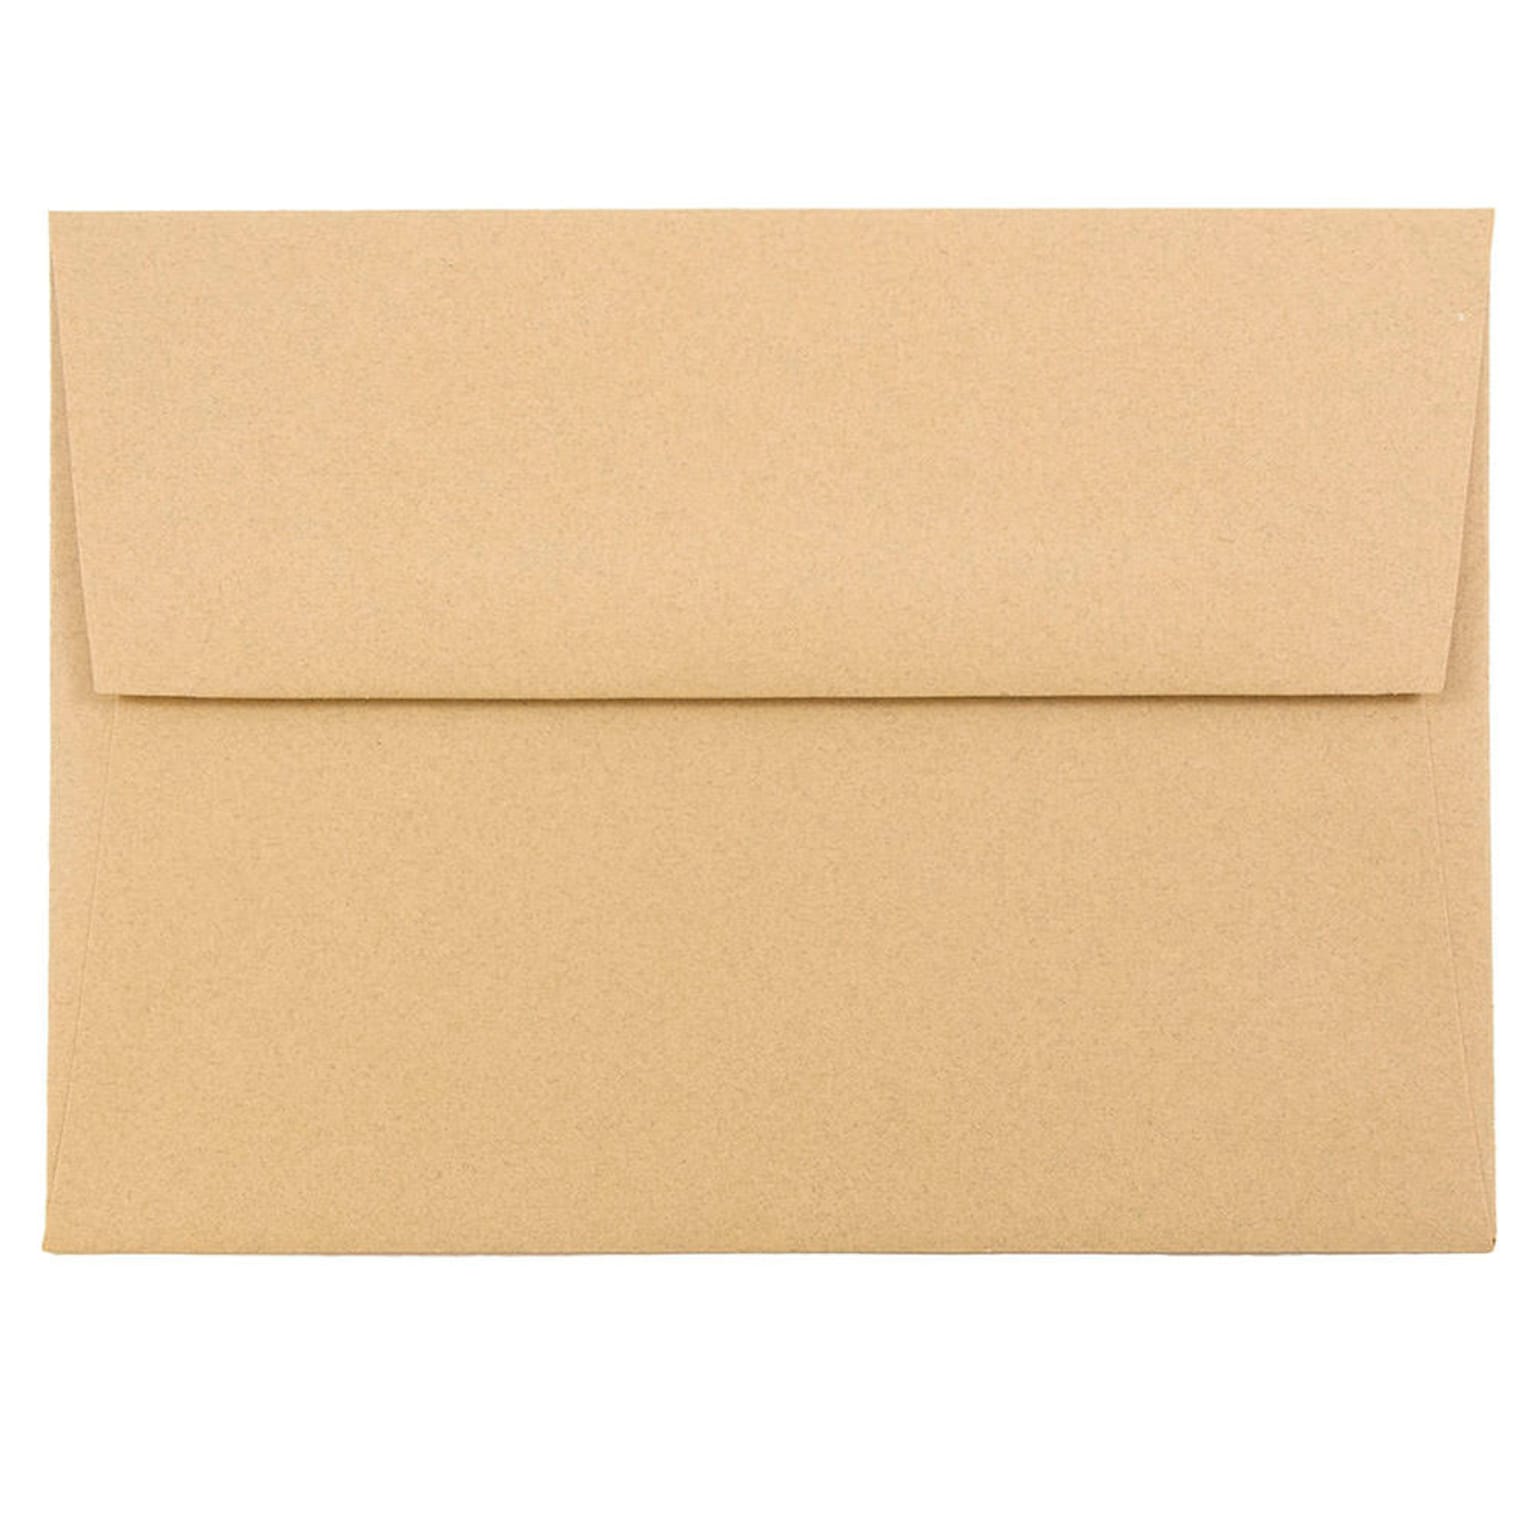 JAM Paper® A6 Passport Invitation Envelopes, 4.75 x 6.5, Ginger Brown Recycled, 25/Pack (11179)